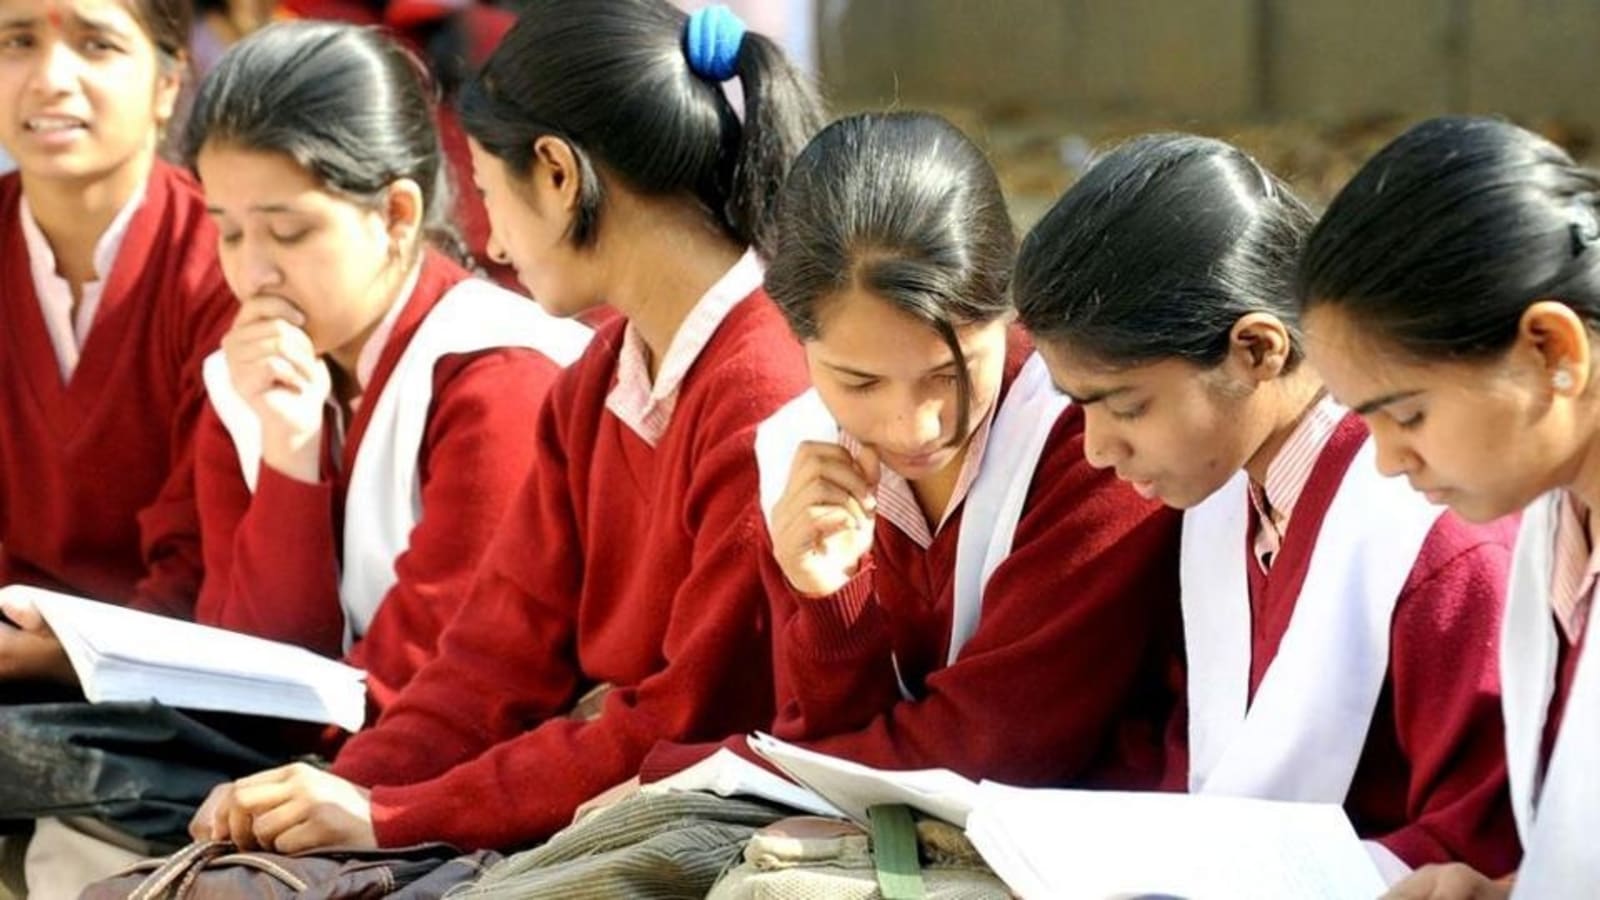 RBSE Rajasthan board Class 5th, 8th results 2022 declared, link soon